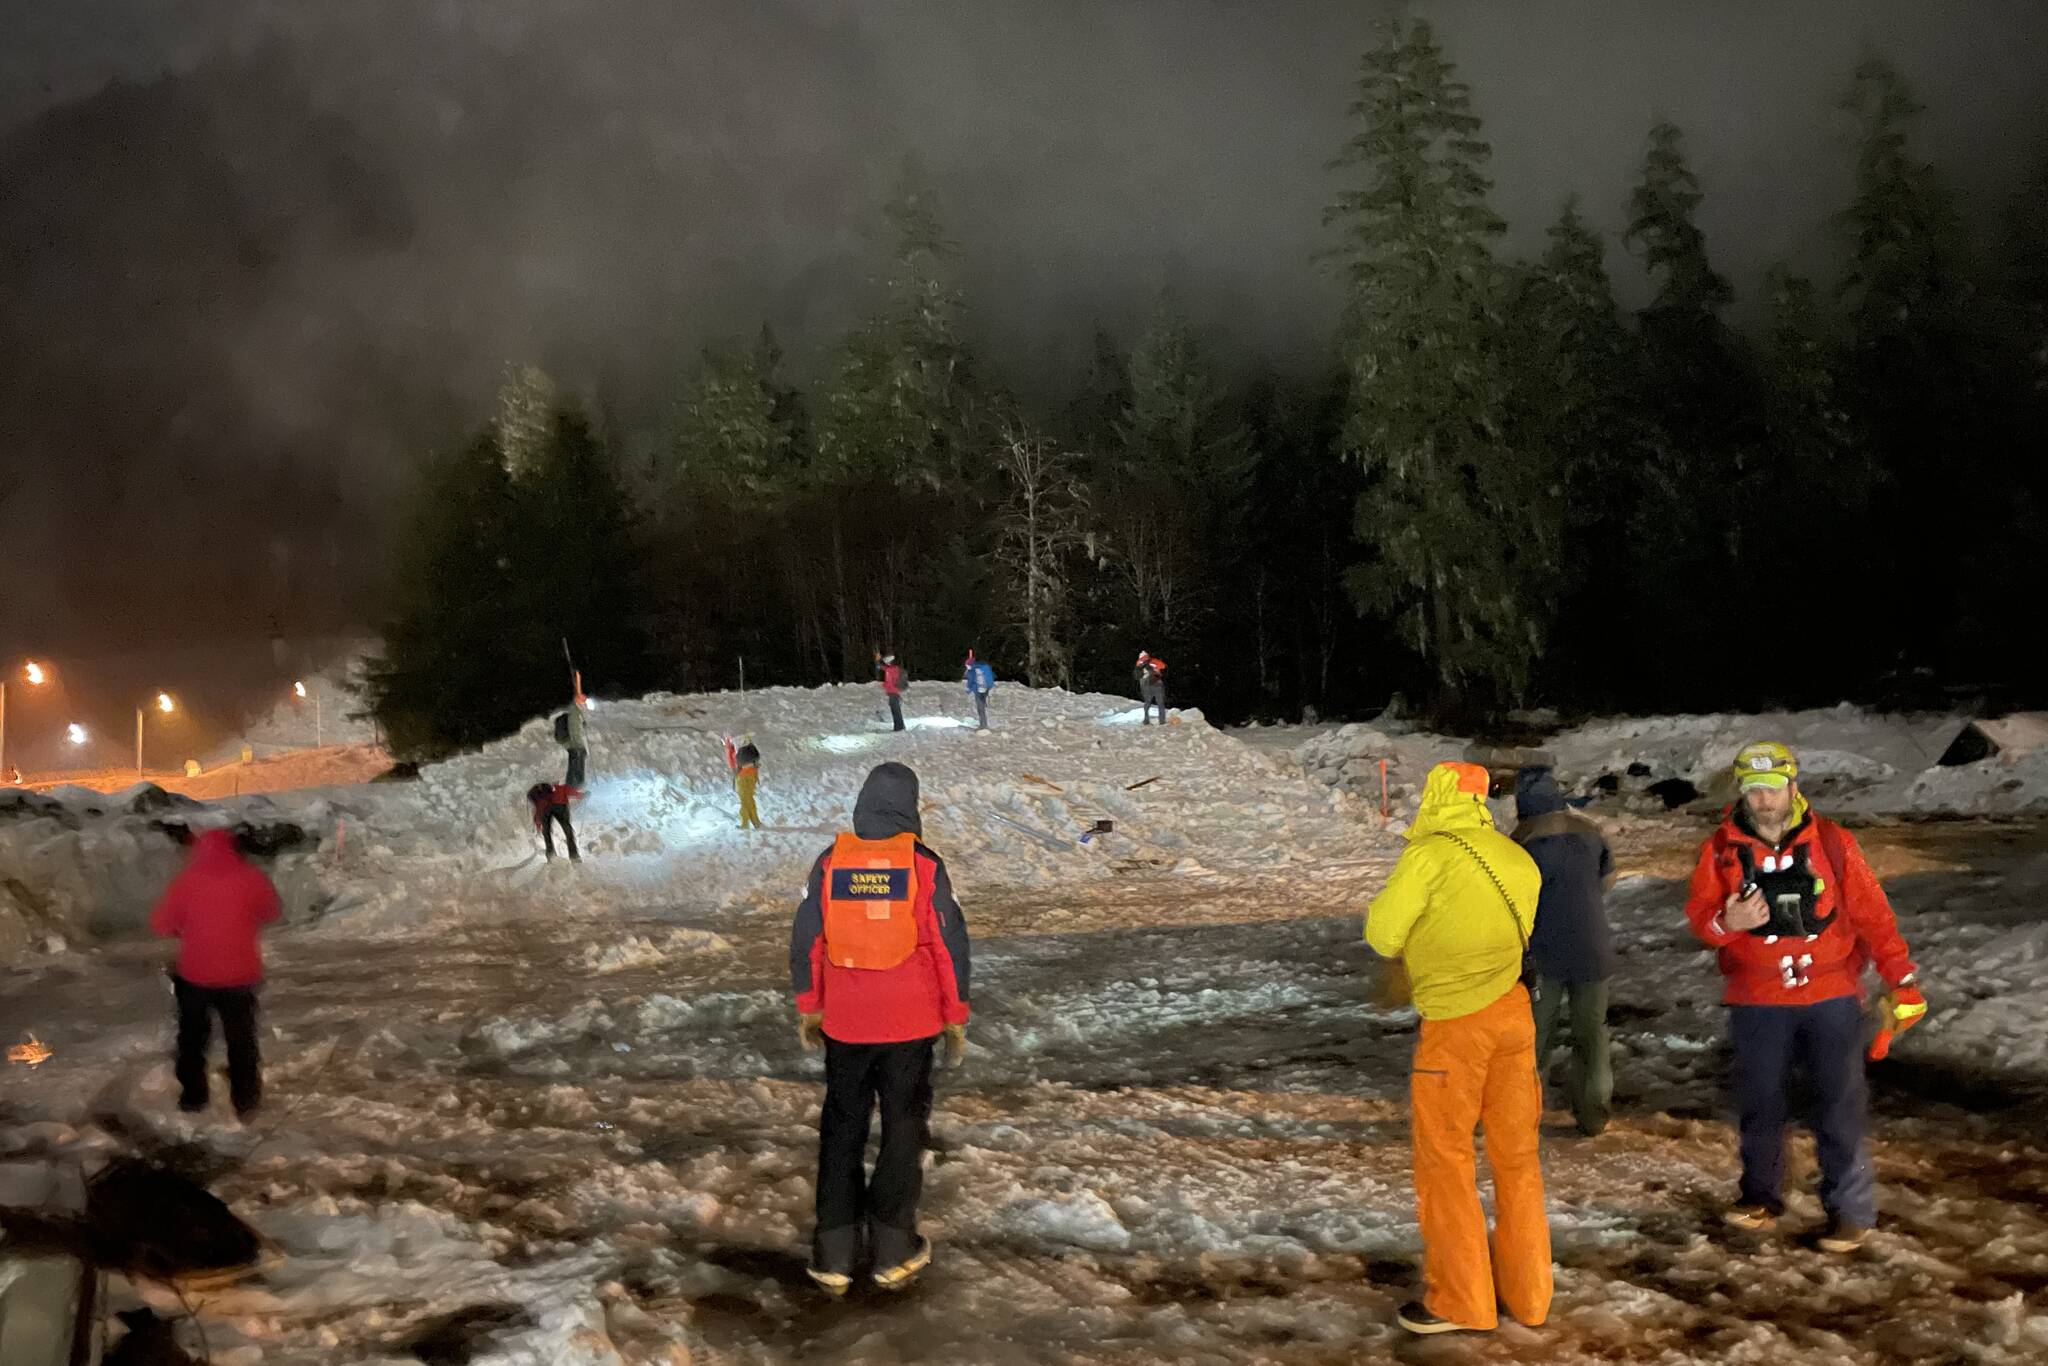 Emergency organizations and search and rescue groups practiced urban avalanche rescues in a large-scale exercise, simulating bodies in the snow and practicing probe lines. (Michael S. Lockett / Juneau Empire)